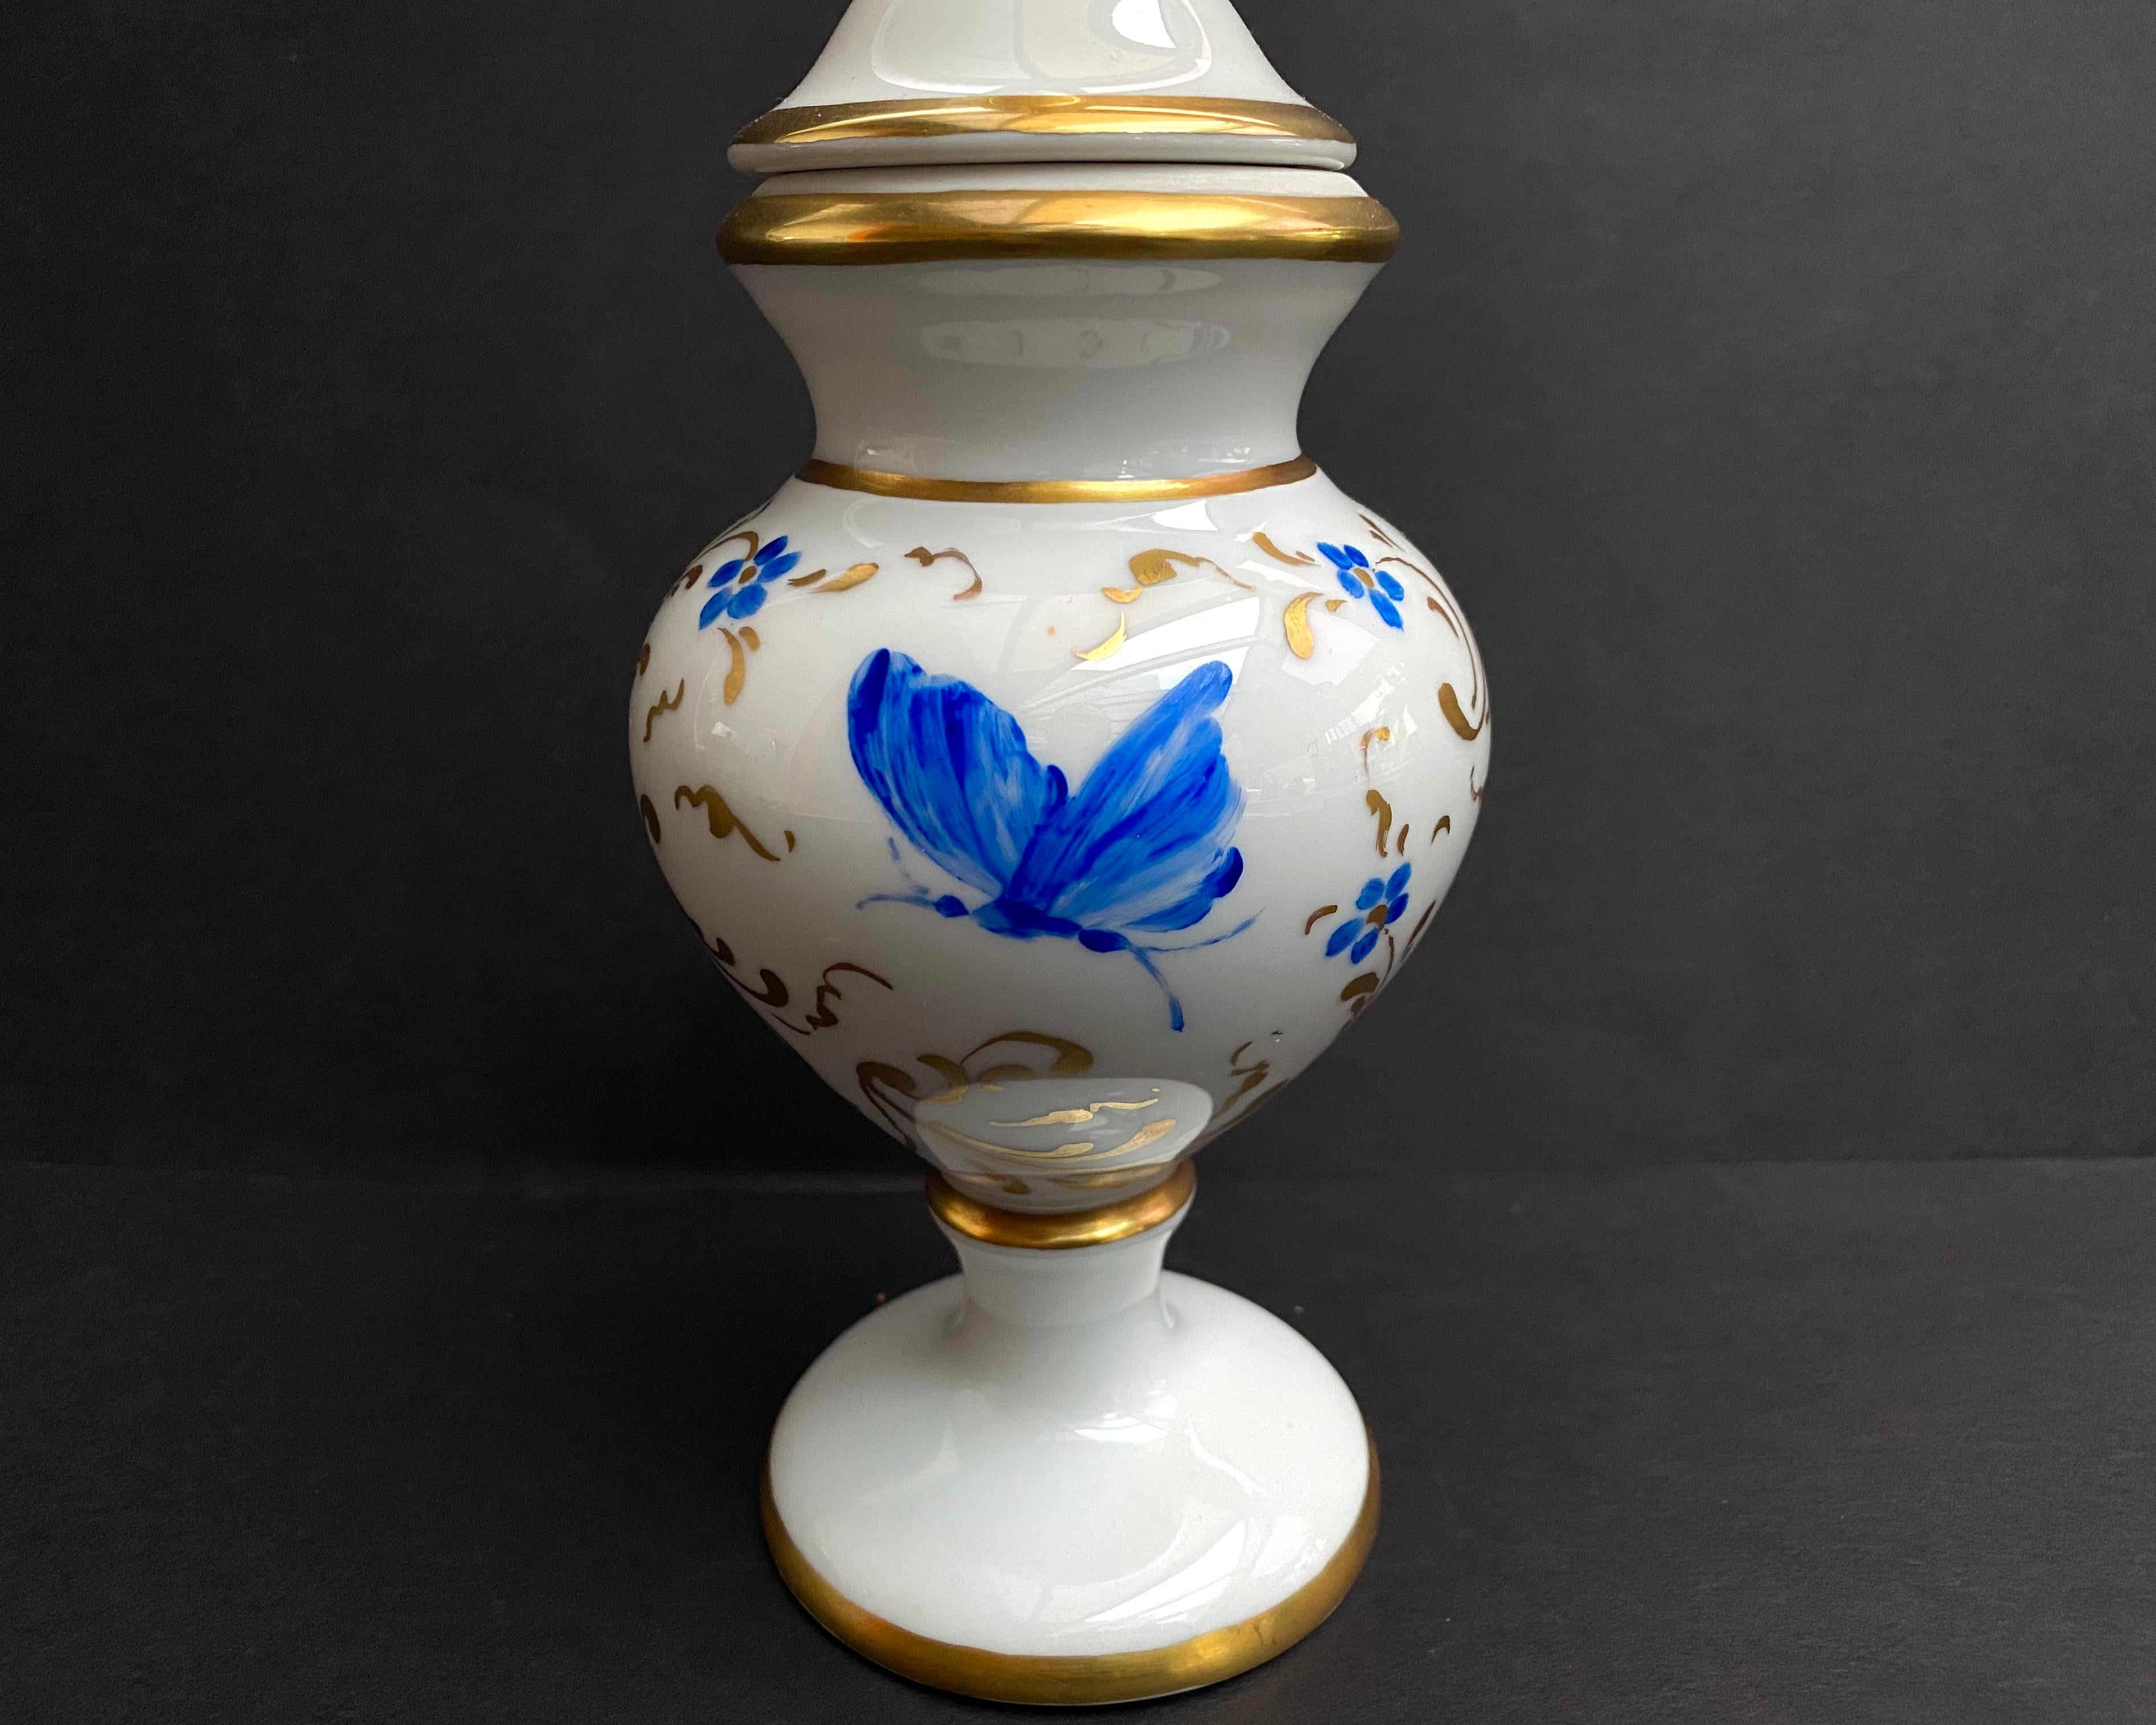 Beautiful vintage vase/jar in porcelain with 24k gold plating.

Circa 1960s, made in France.

Hand-painted flowers and butterfly motif with author’s signature.

With this vase you can create comfort and harmony in any room.

The vase is very